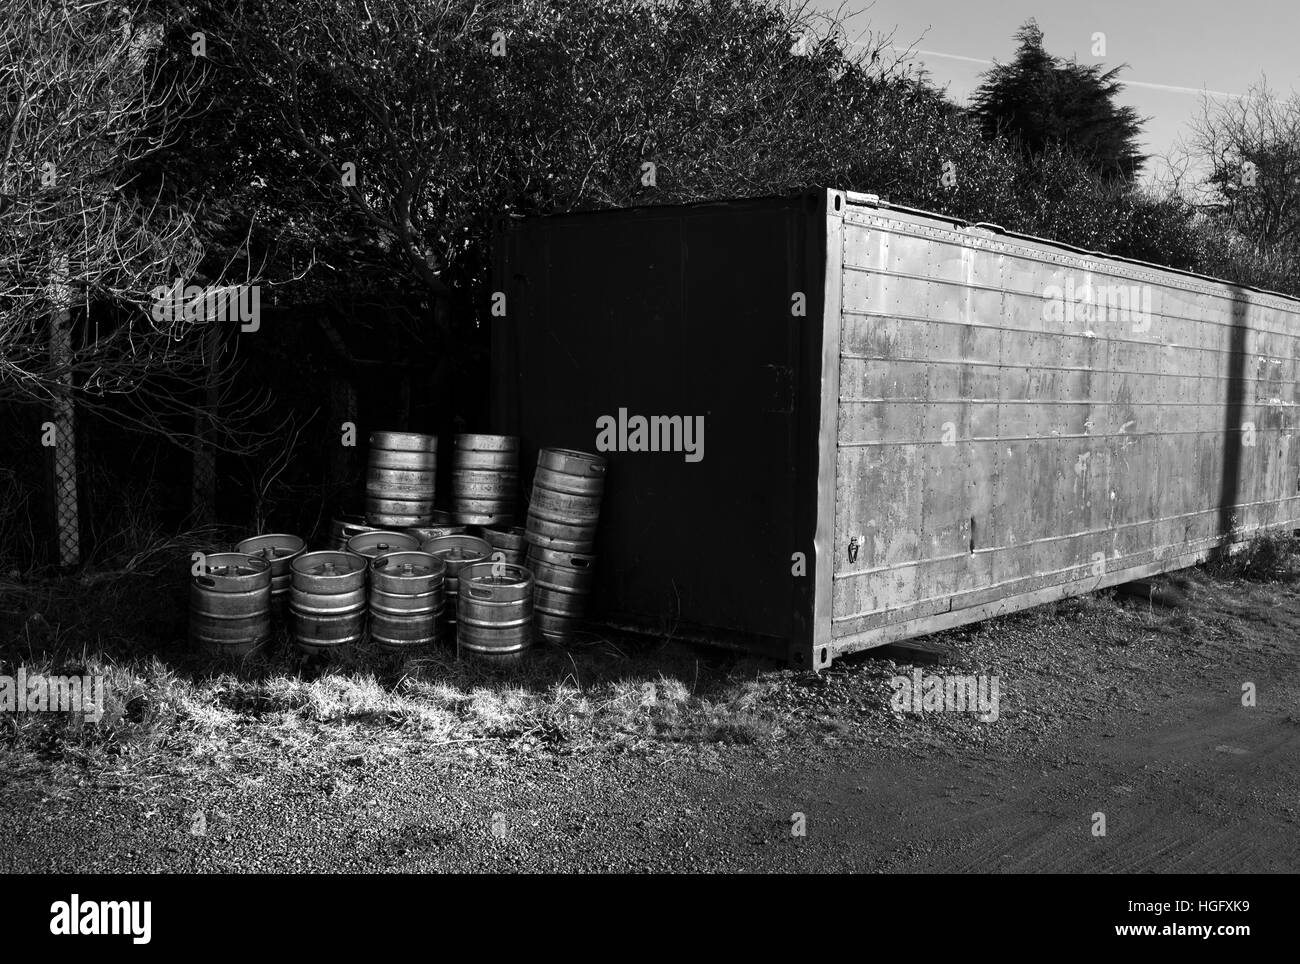 Kegs and containers,Tow Law AFC, Ironworks Road Stock Photo